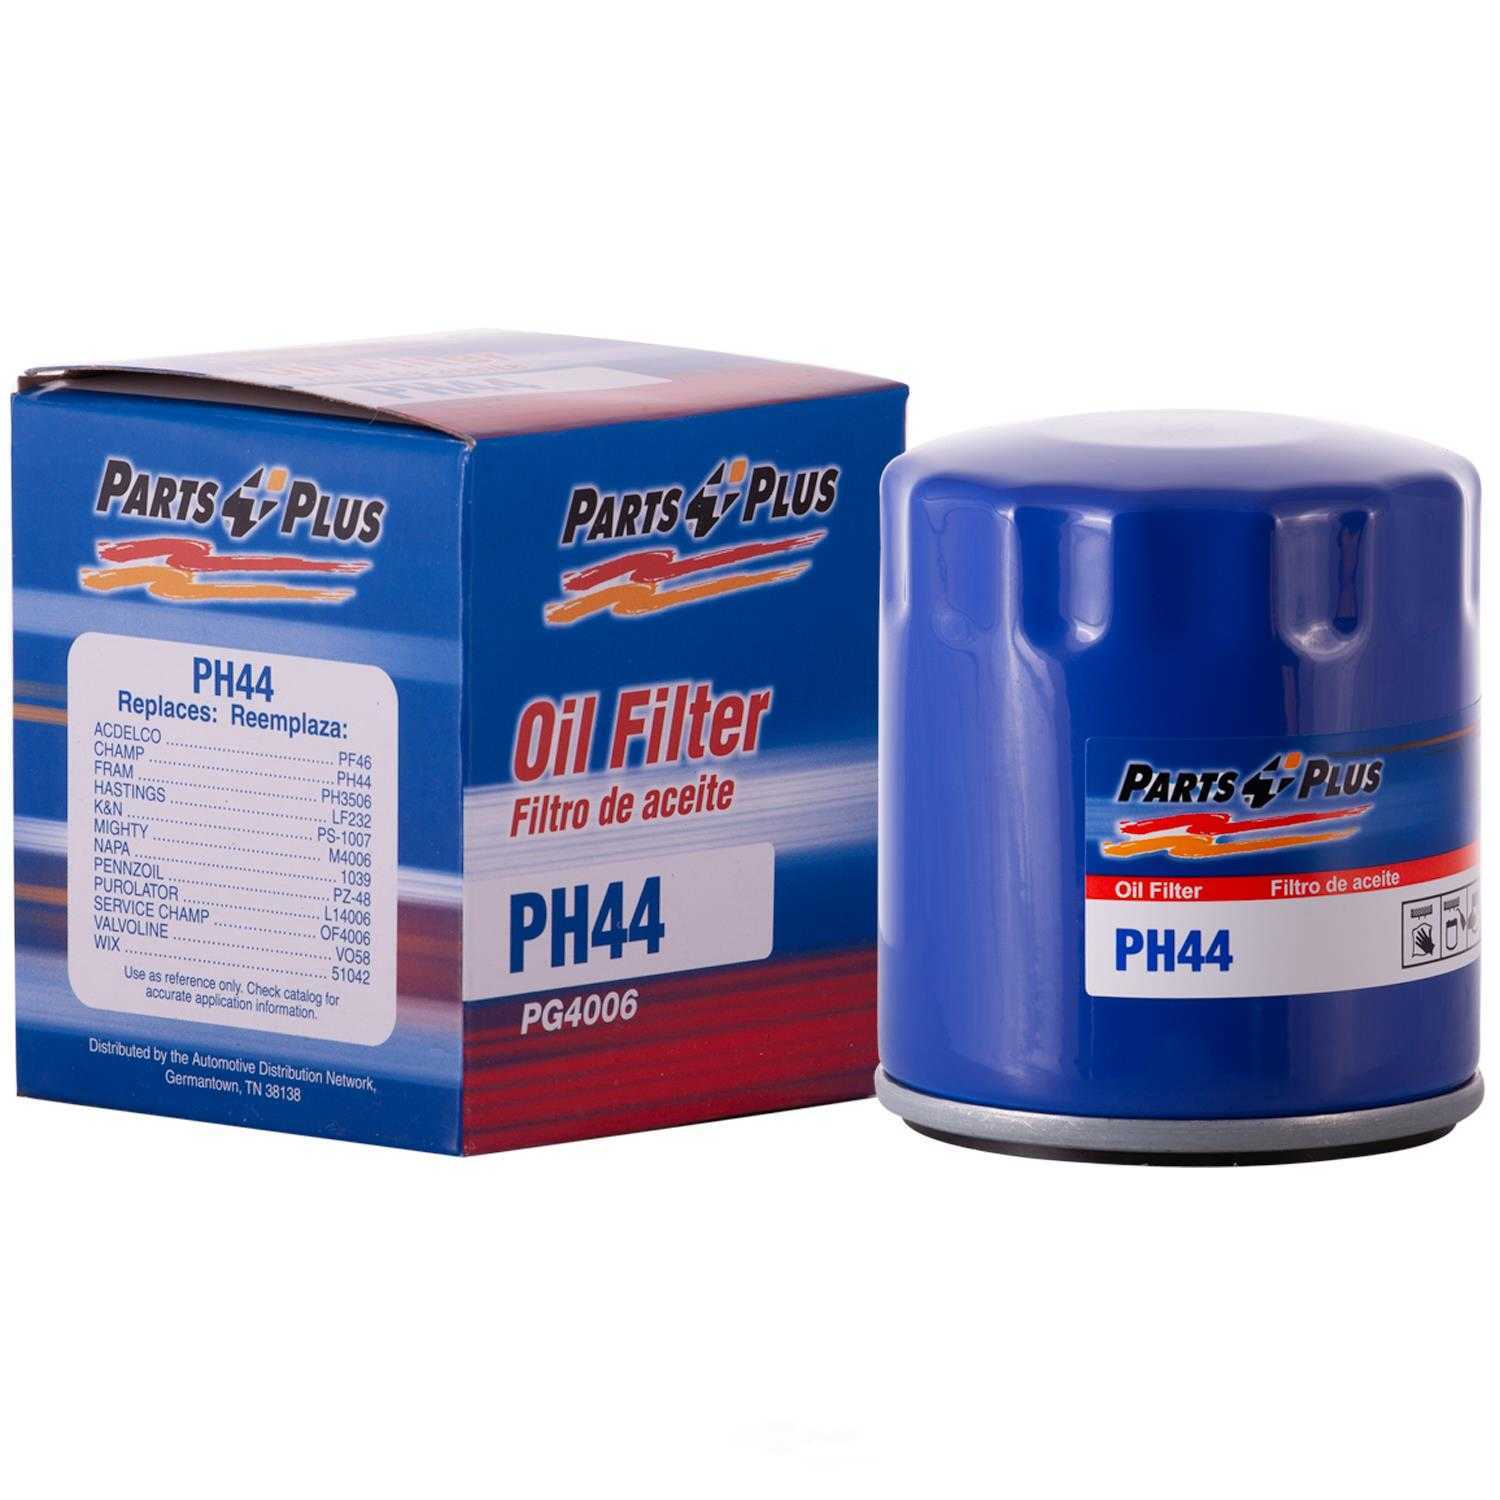 PARTS PLUS FILTERS BY PREMIUM GUARD - Standard Life Oil Filter - PLF PH44